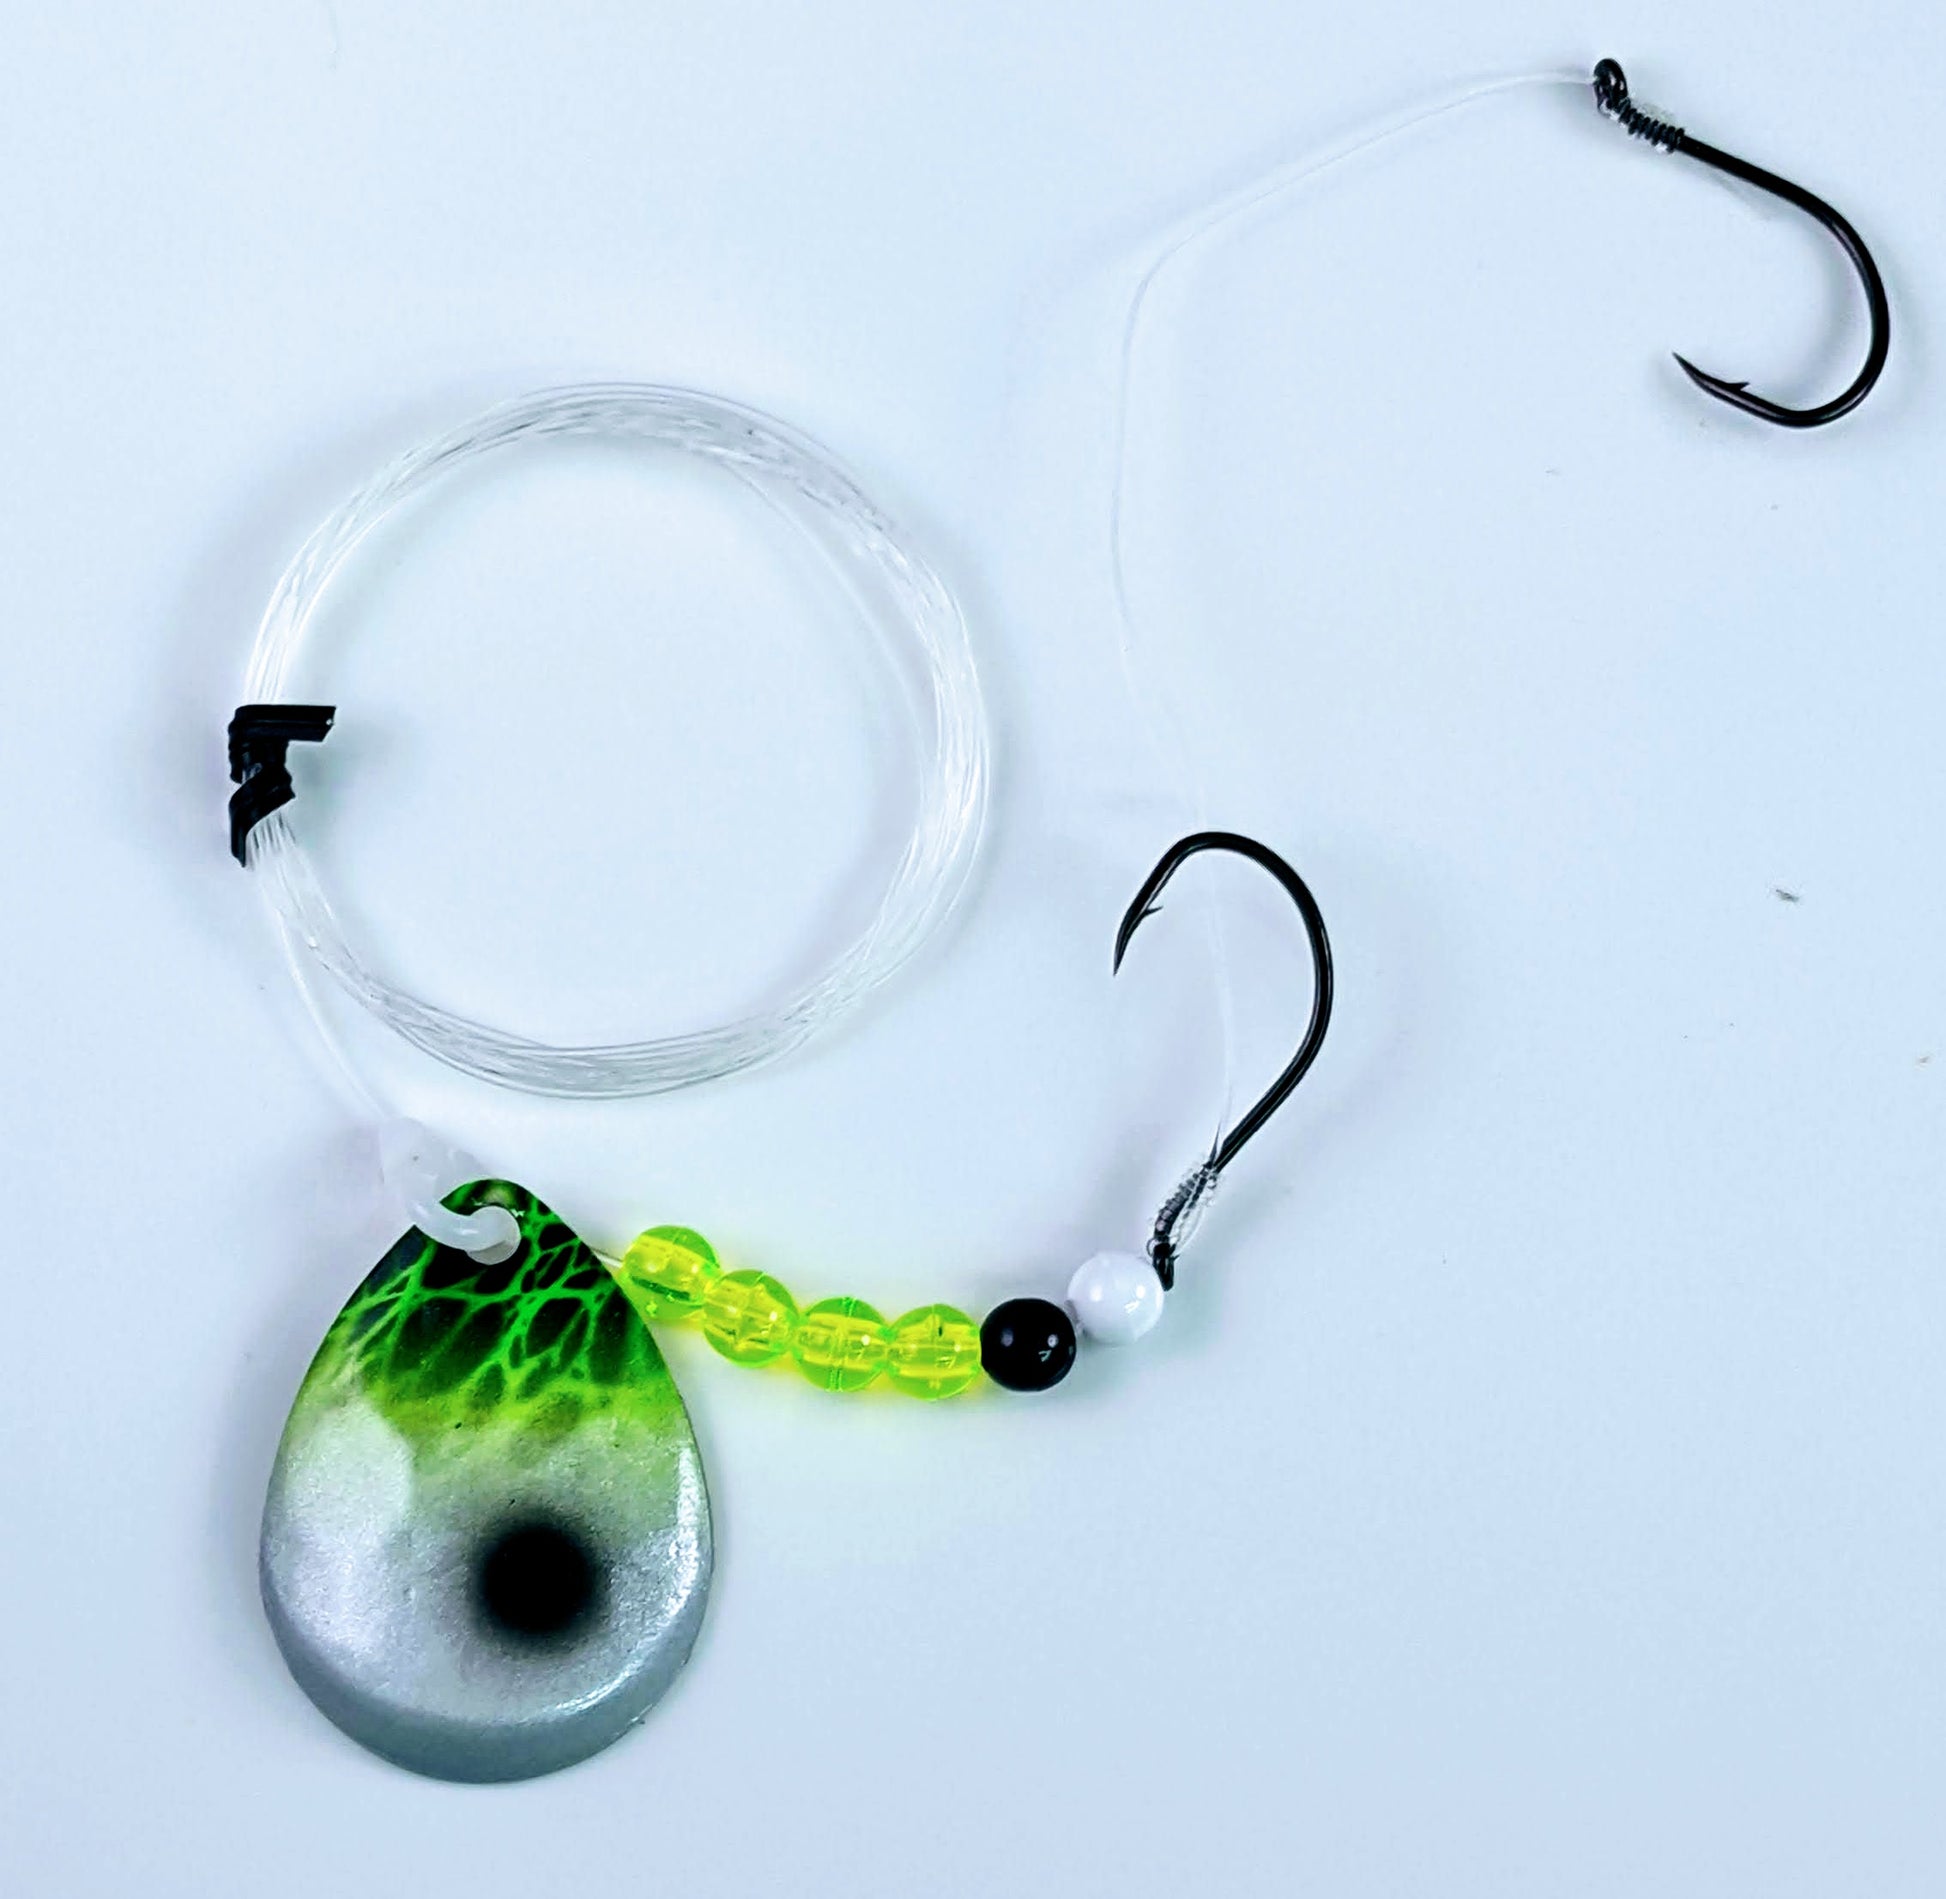 Vertical Jigs and Lures - McNary Special - Vertical Jigs and Lures Custom Pro-Series Crawler Harness